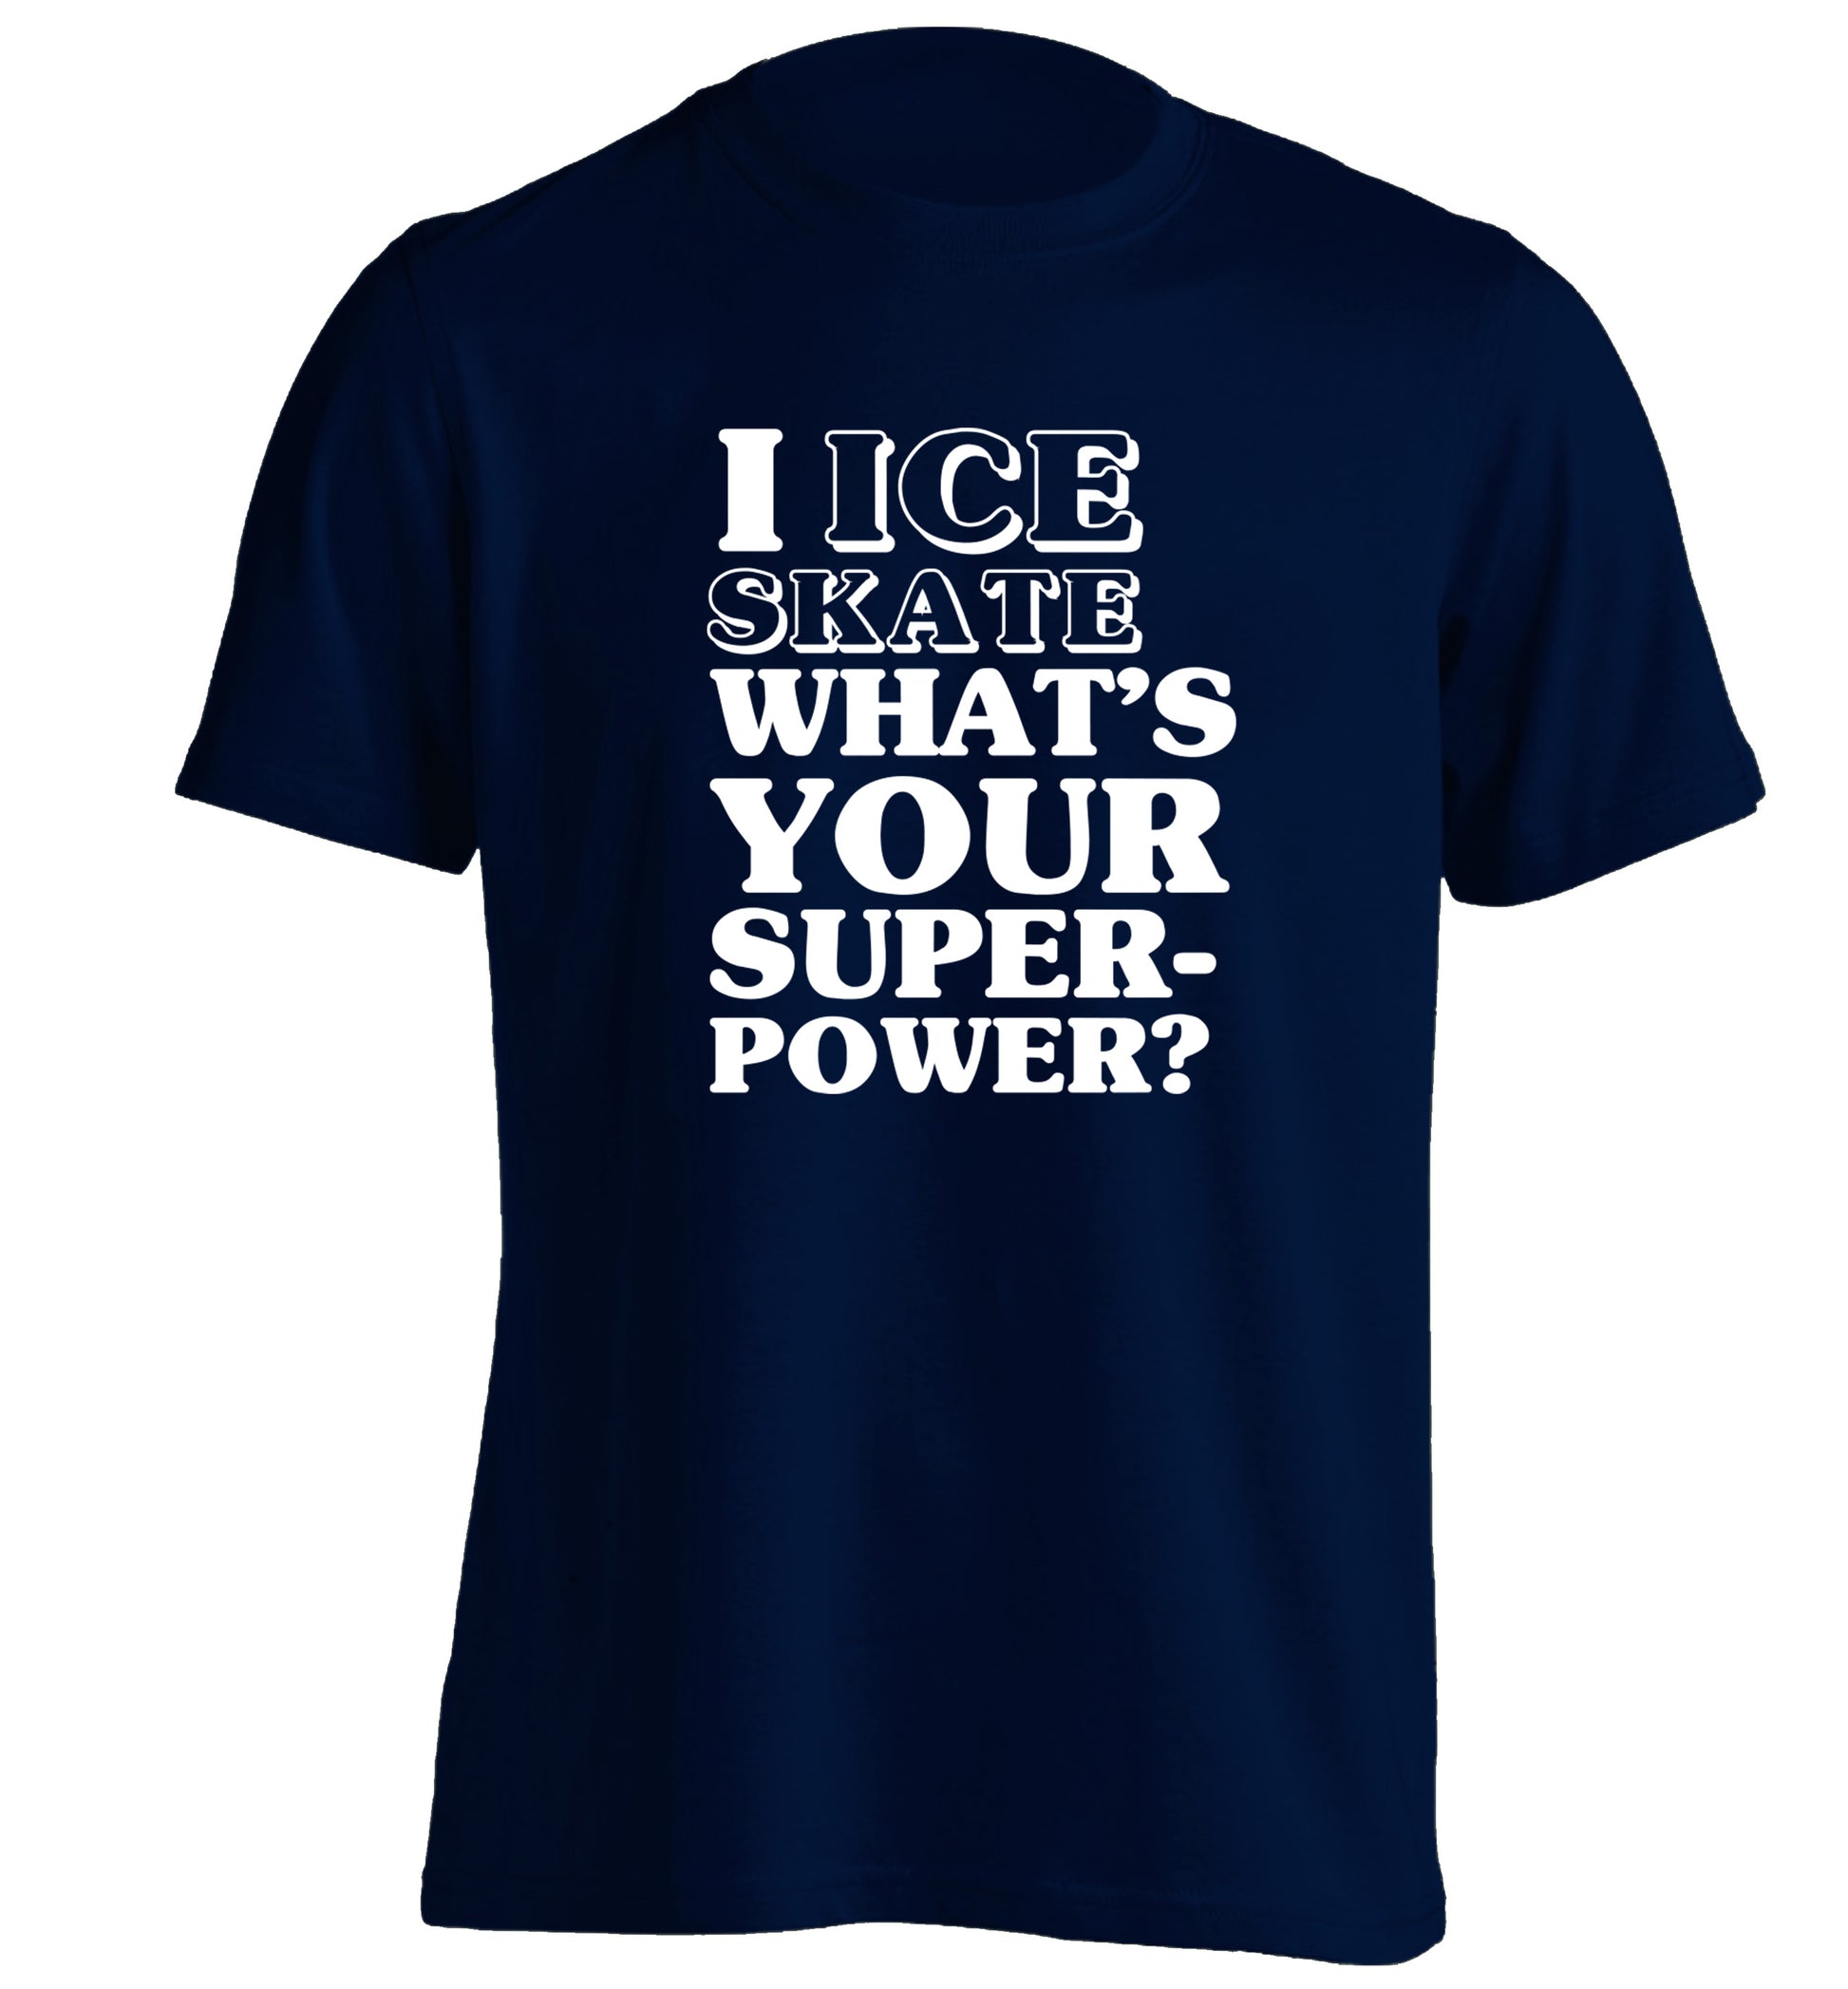 I ice skate what's your superpower? adults unisexnavy Tshirt 2XL